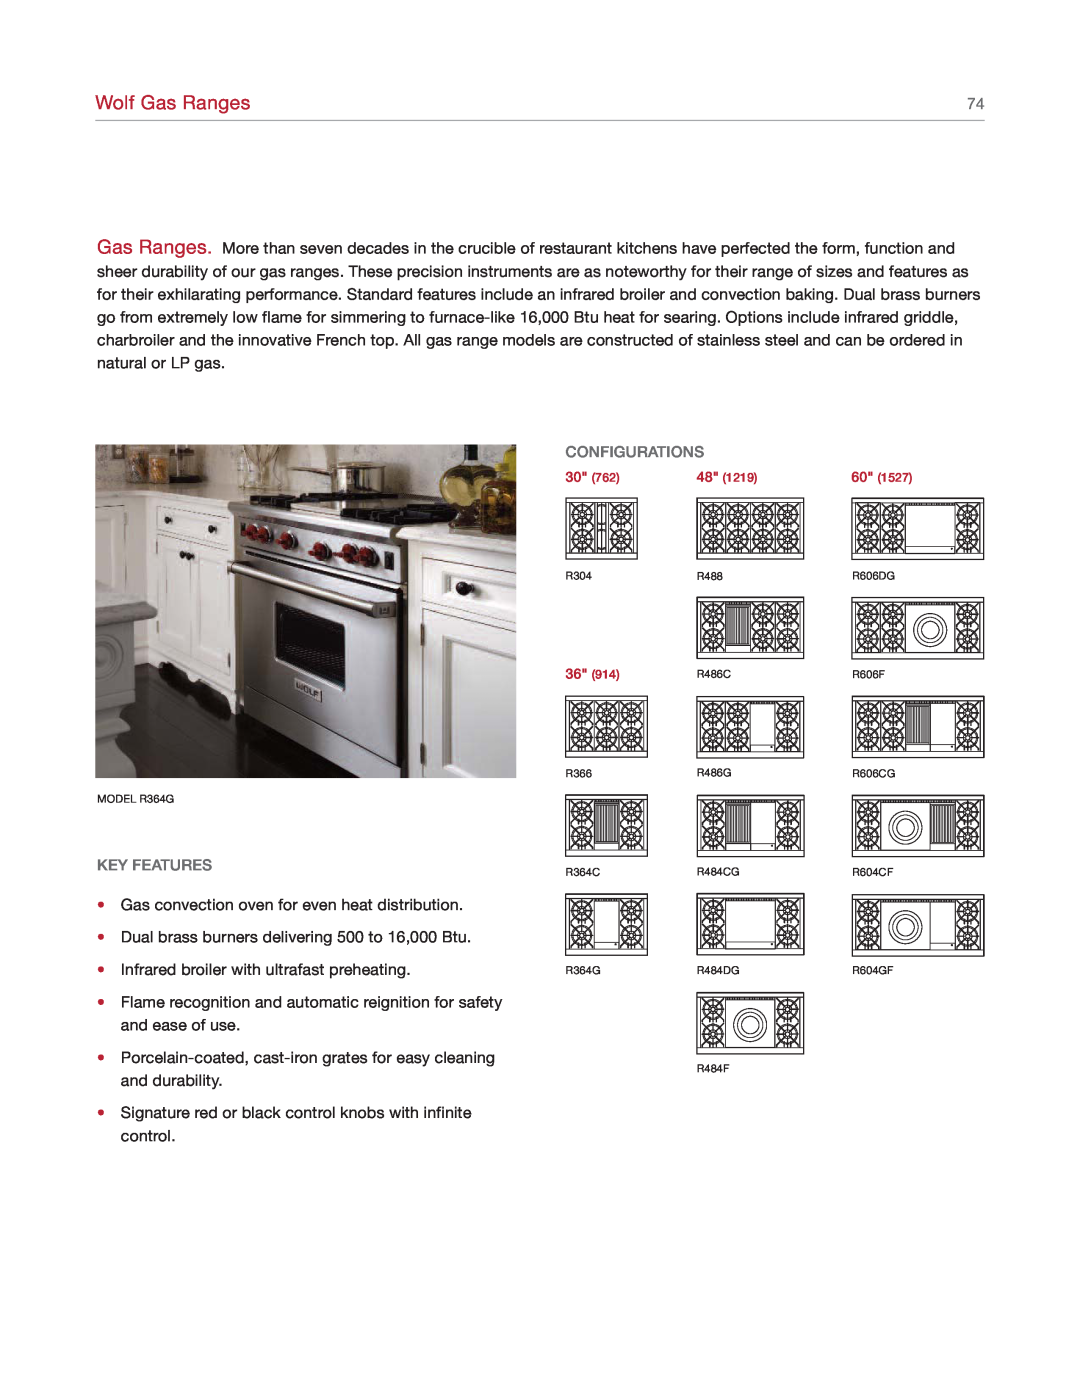 Sub-Zero R364G manual Wolf Gas Ranges, Key Features, Configurations 